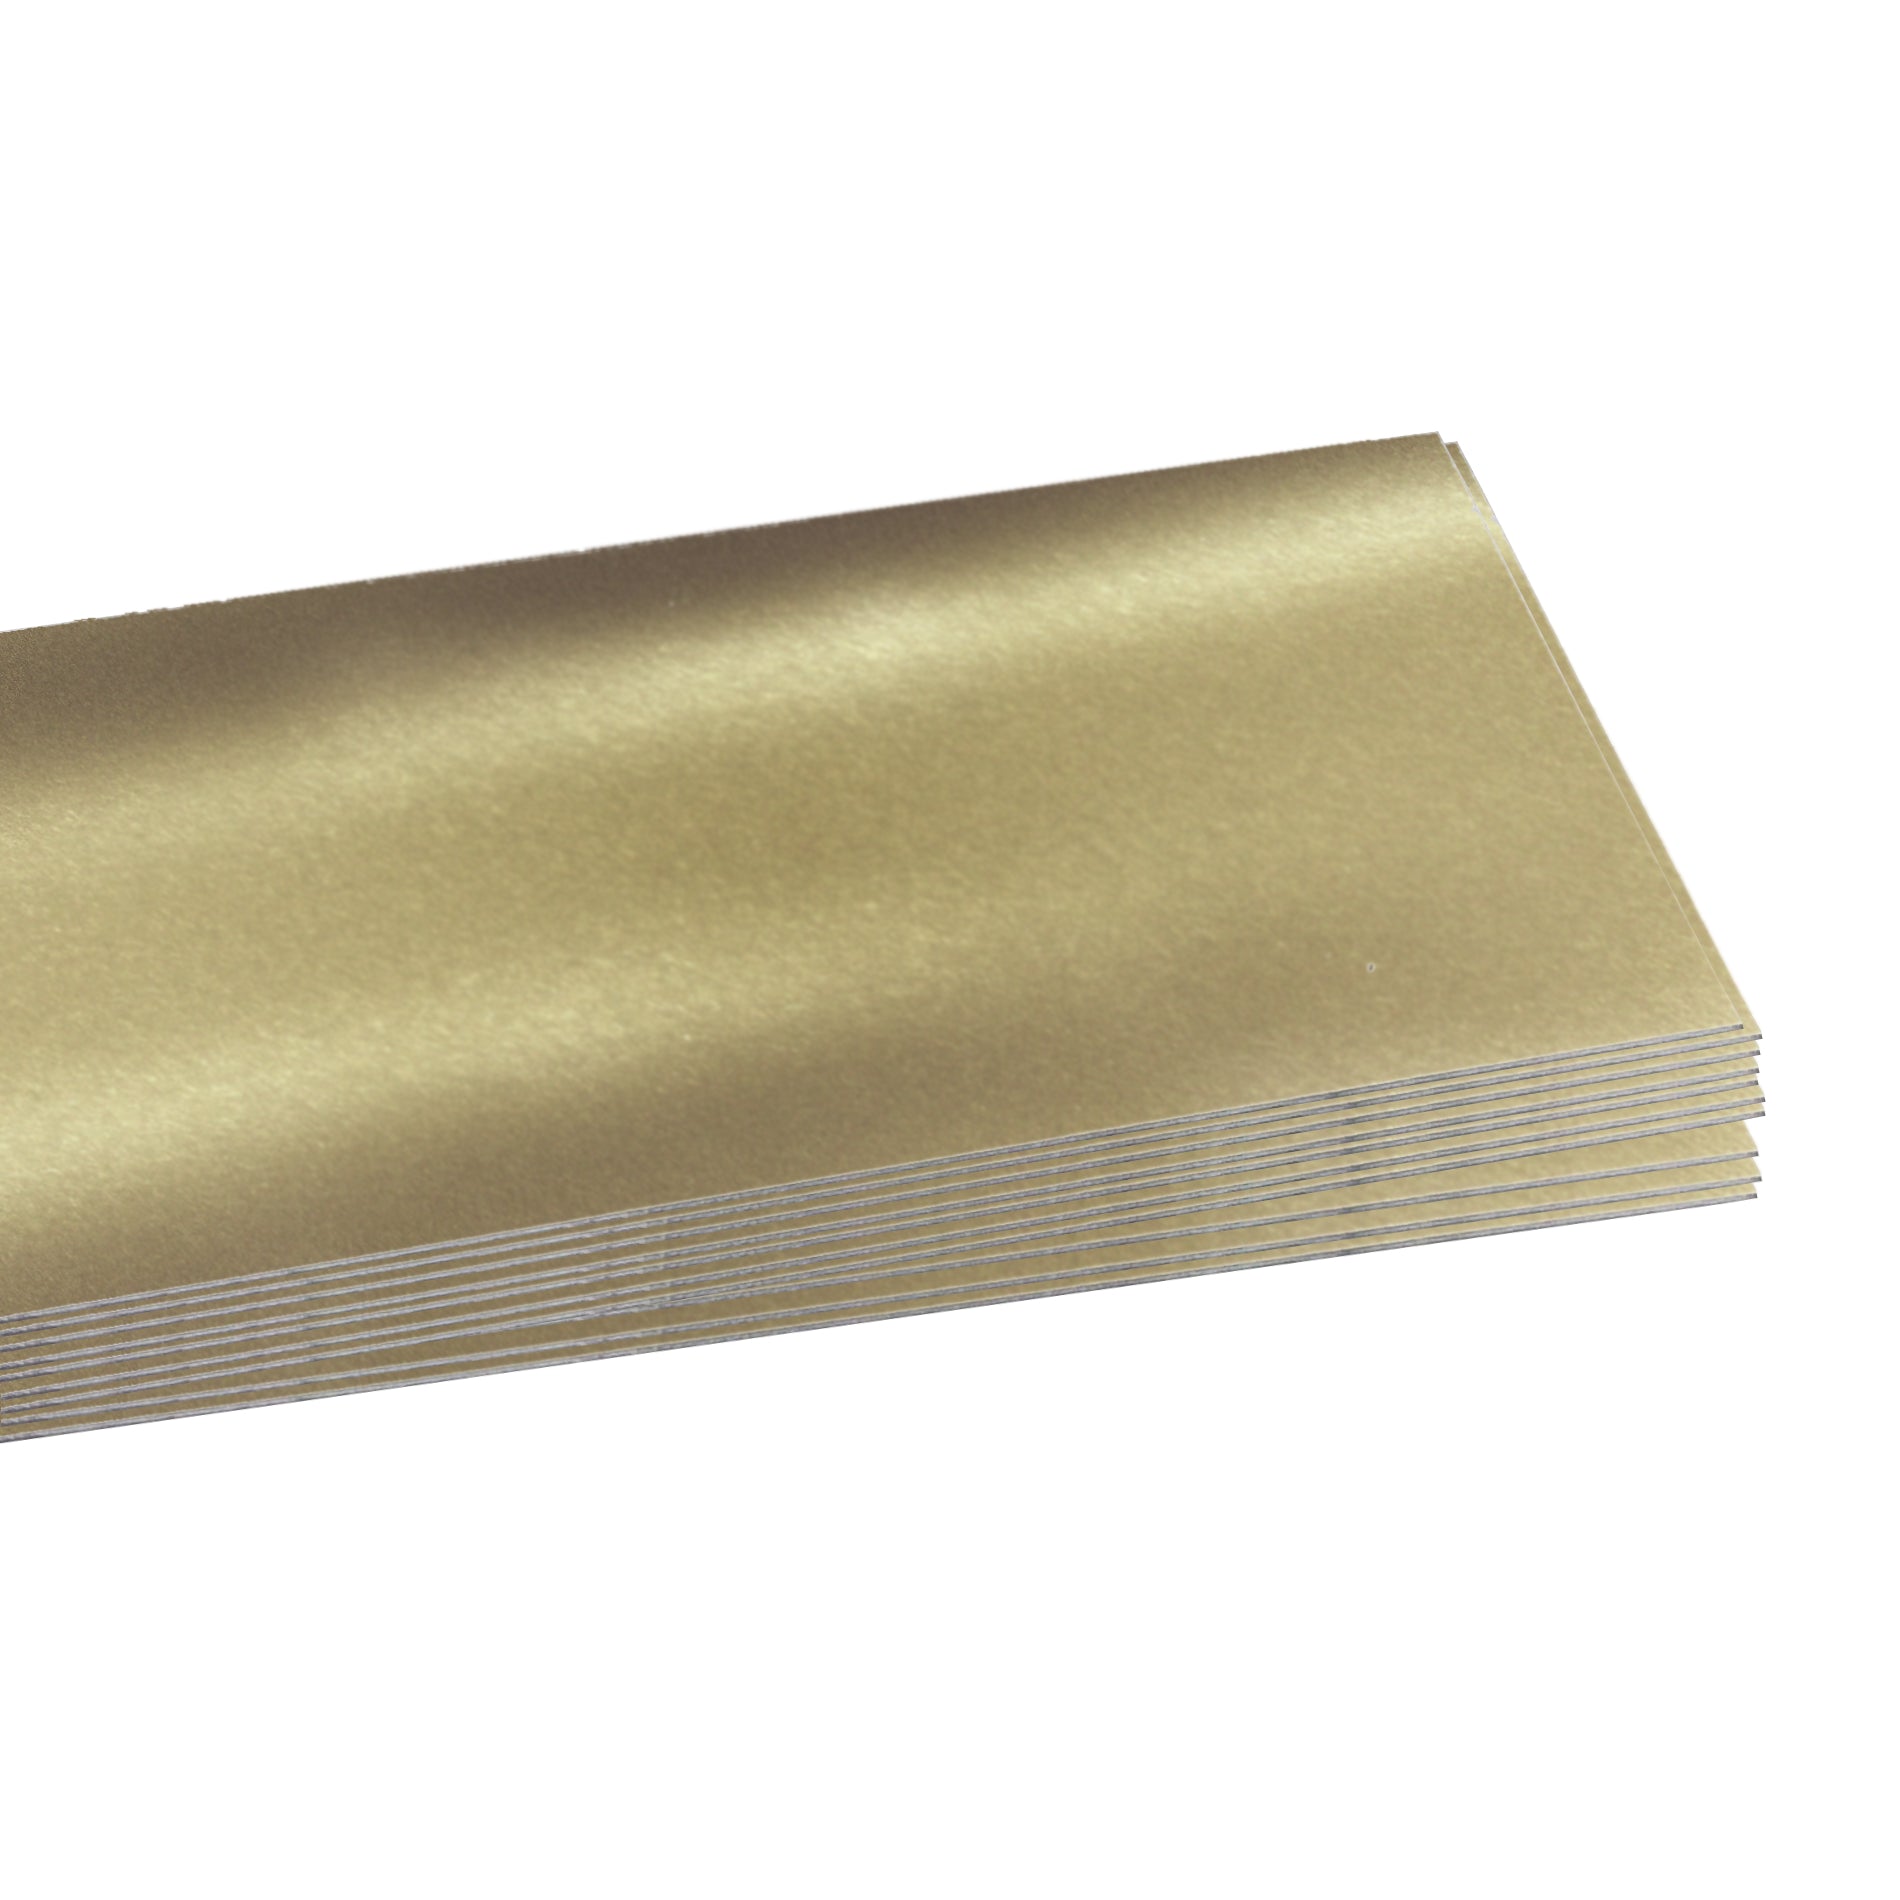 Sublimation Metal Blanks 12x16 Inch Aluminum, Old Gold 